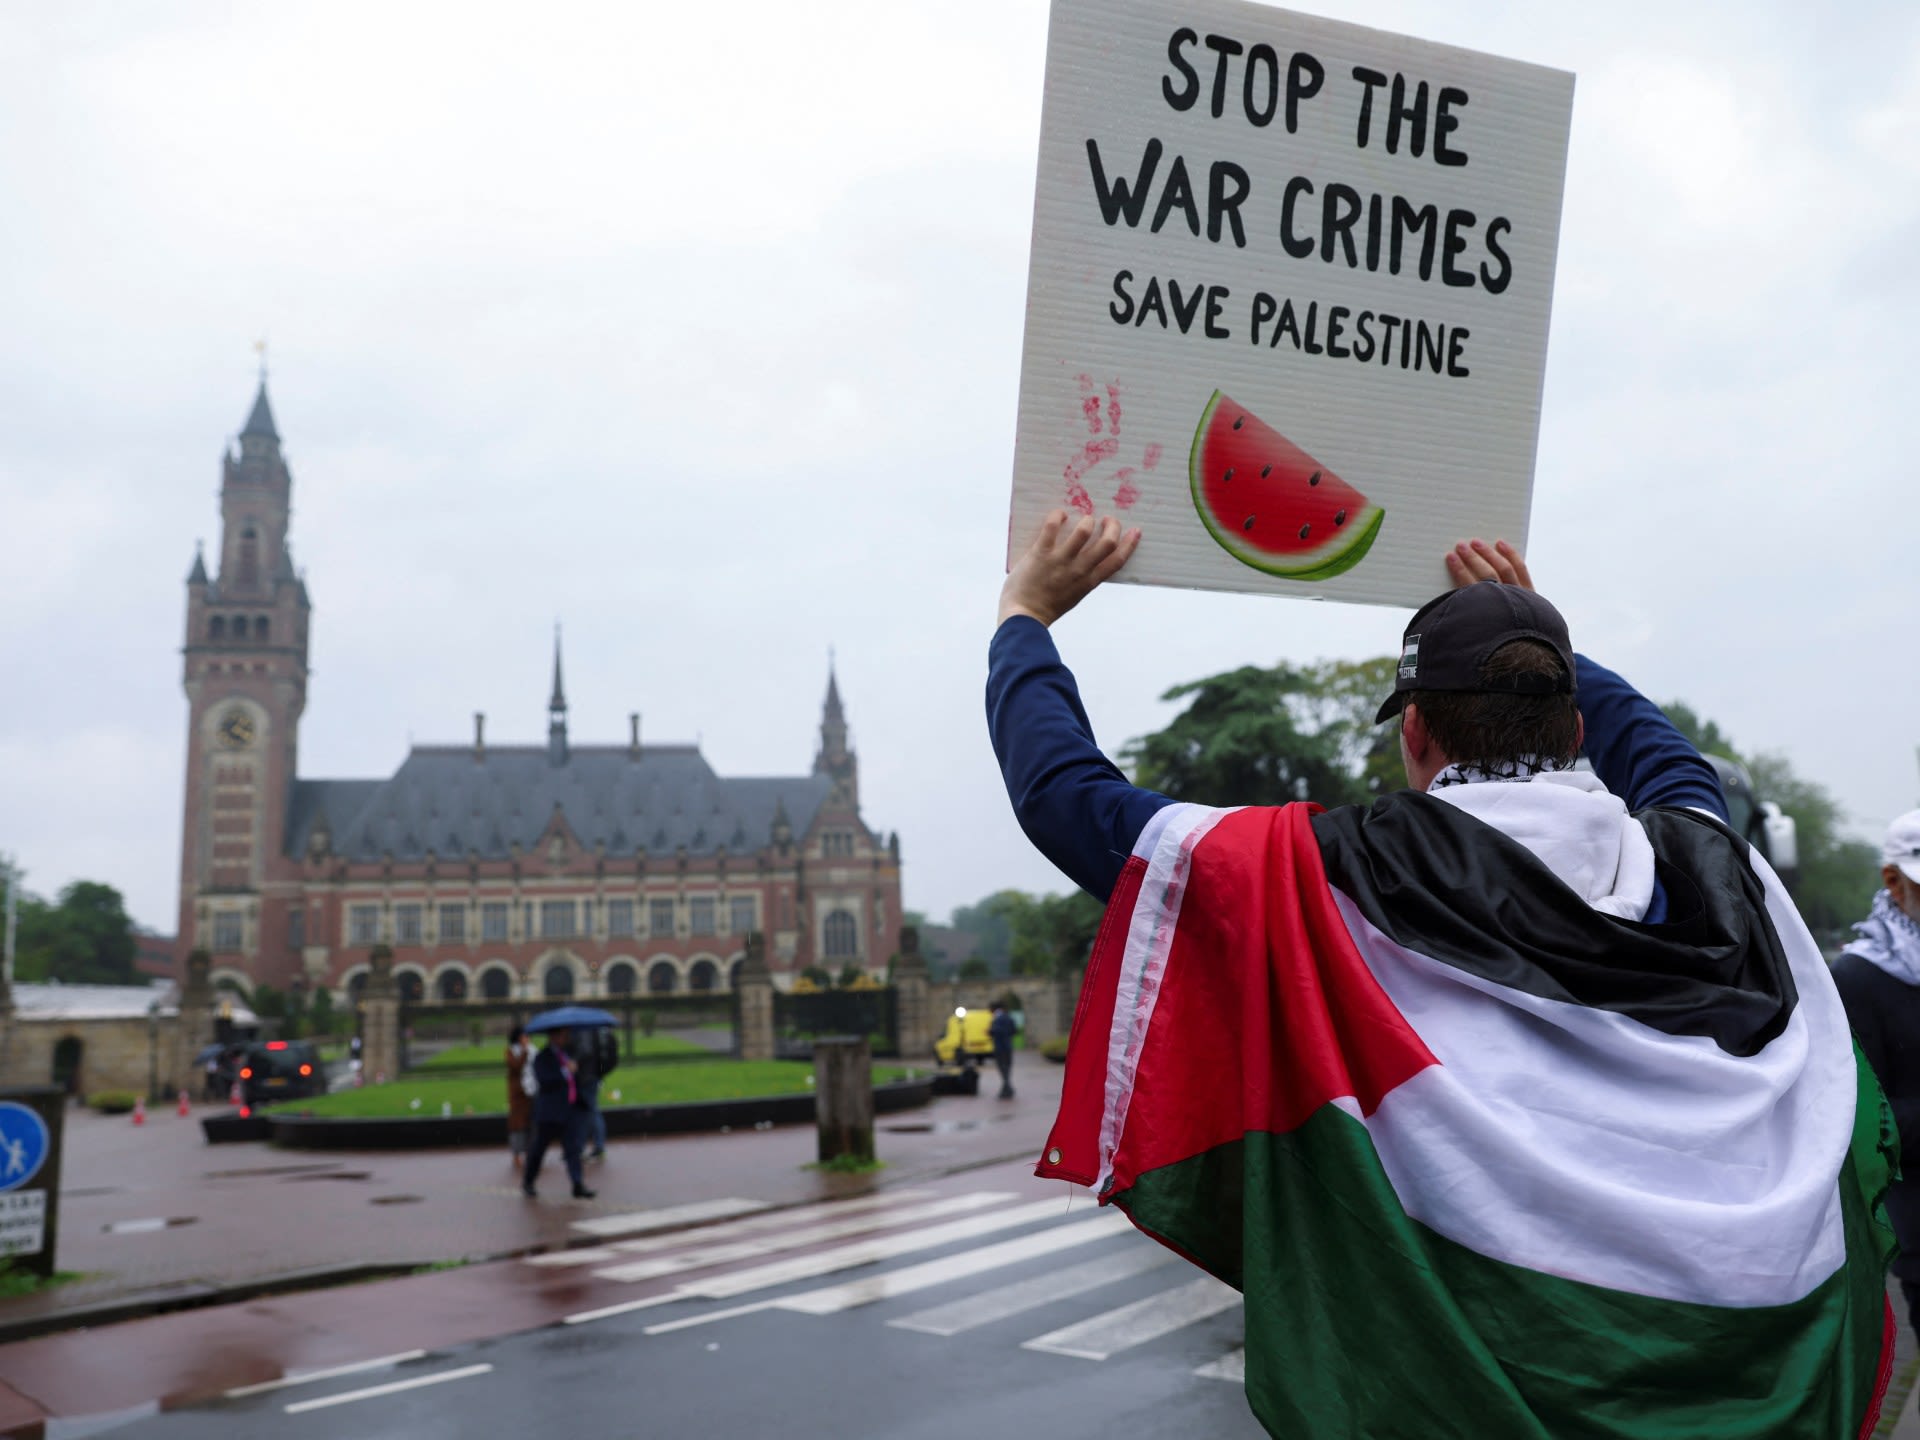 Palestinians urge world to end Israel’s illegal occupation after ICJ ruling